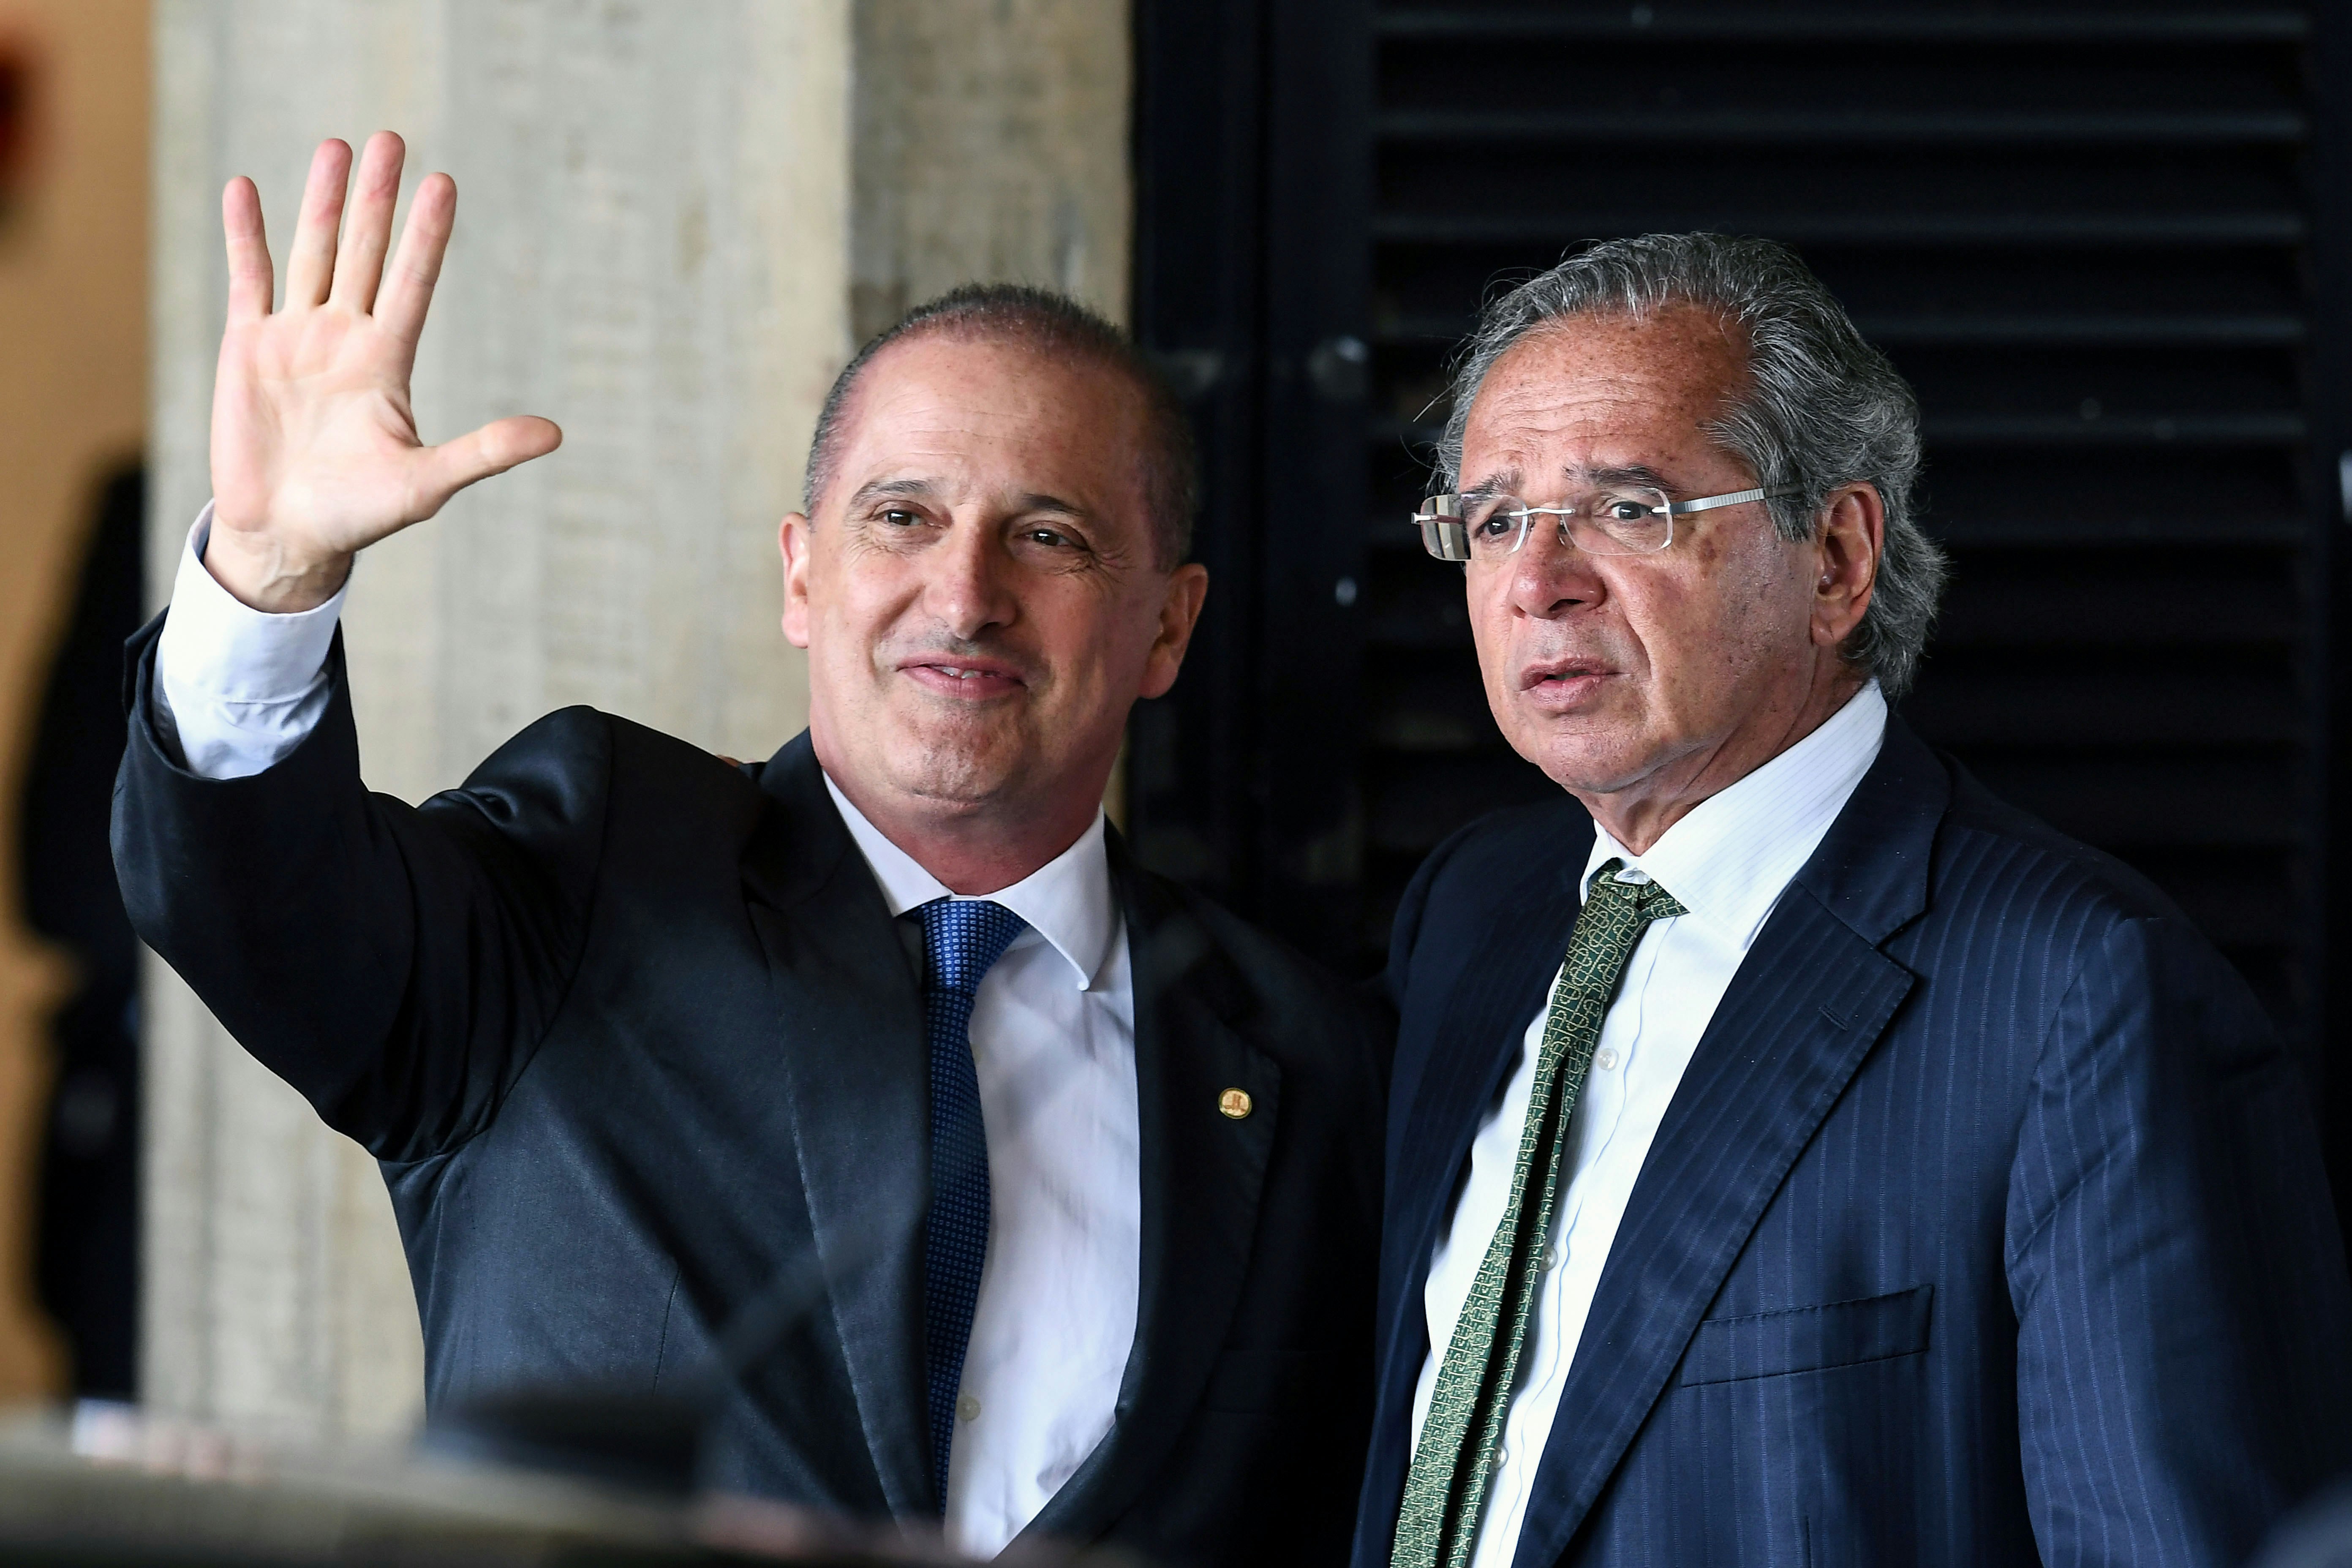 Onyx Lorenzoni (L), the future Chief of Staff of Brazilian president-elect Jair Bolsonaro's government and Paulo Guedes, who was appointed as Finance Minister gesture uppon arrival at the transitional government's headquarters in Brasilia on November 21, 2018. (Photo by EVARISTO SA / AFP)        (Photo credit should read EVARISTO SA/AFP/Getty Images)